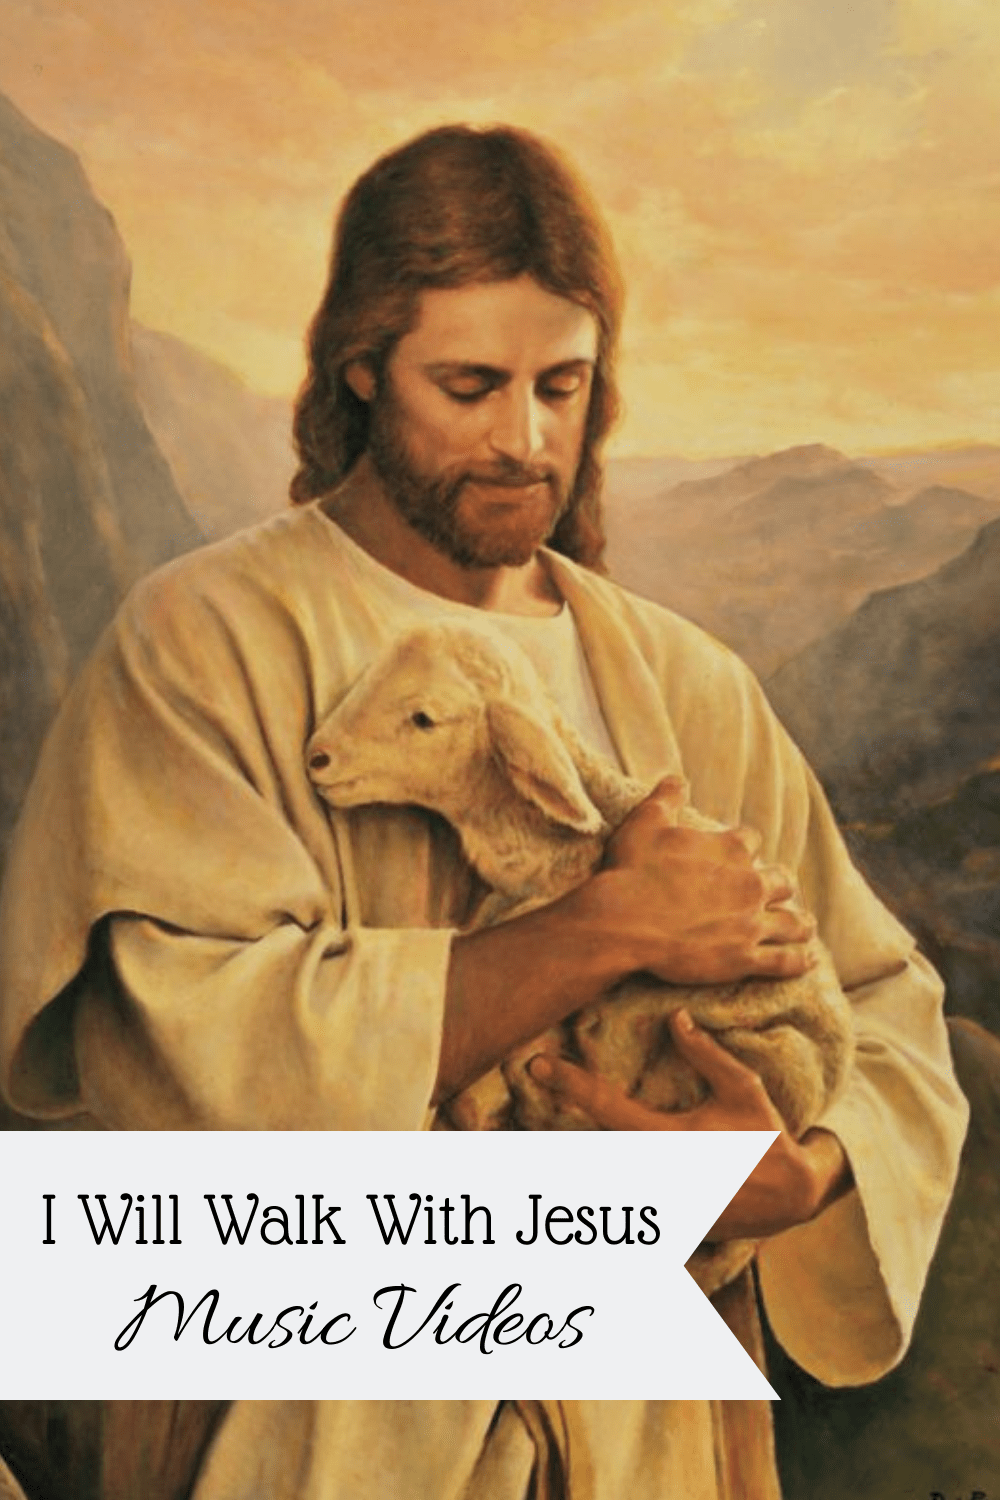 I Will Walk with Jesus Music Videos singing time ideas for LDS Primary music leaders teaching this song.